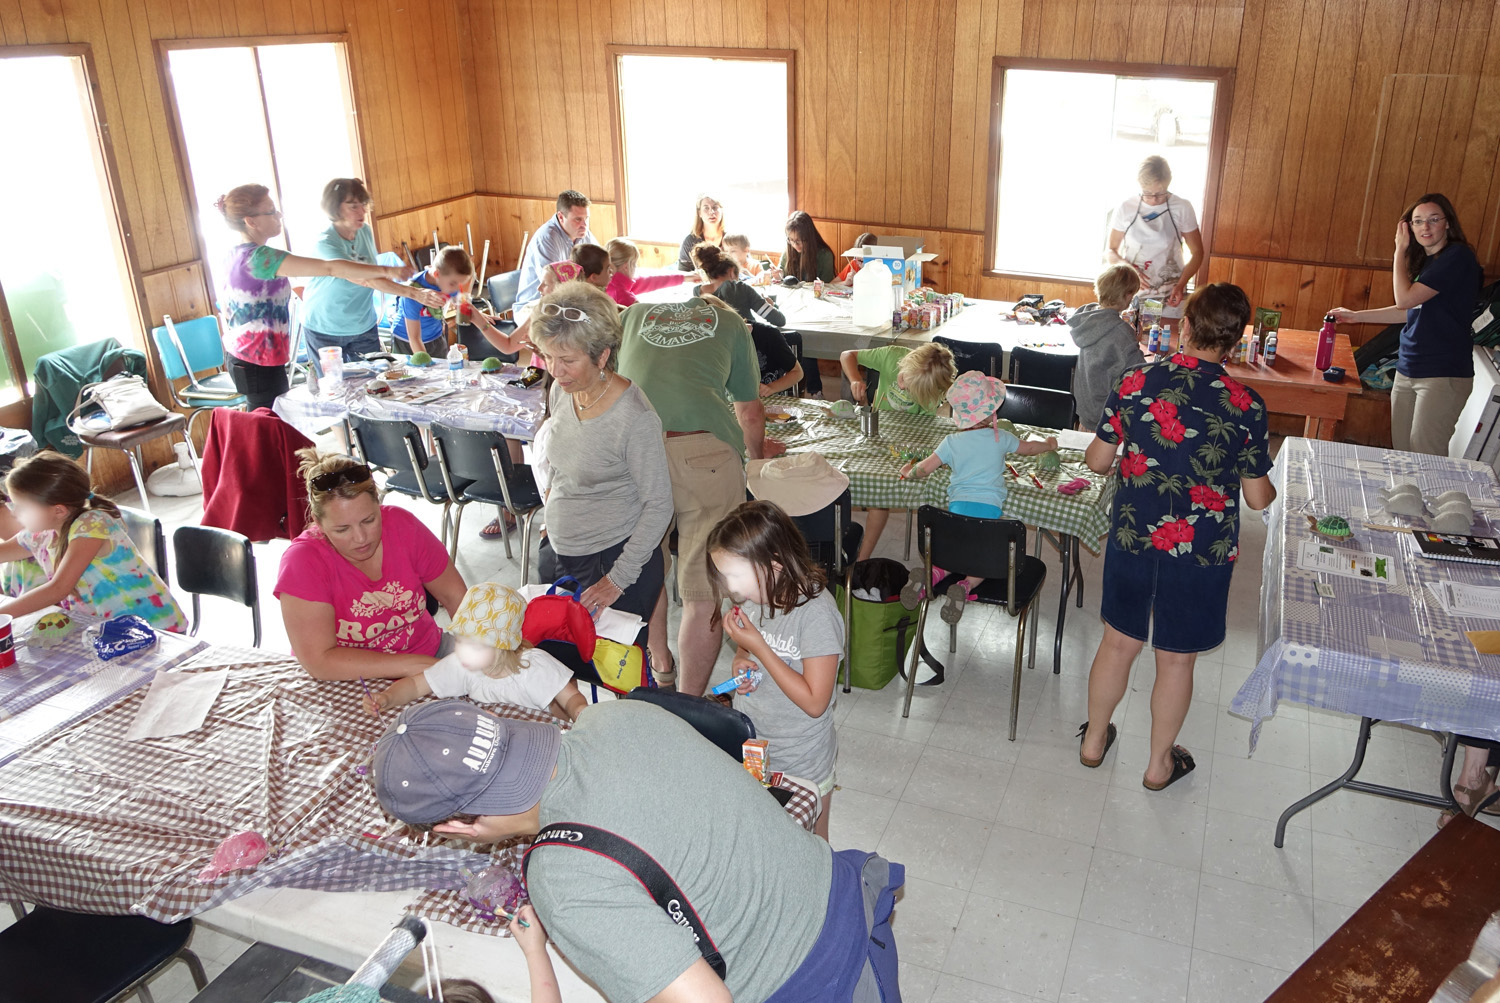  crowd at the craft workshop 